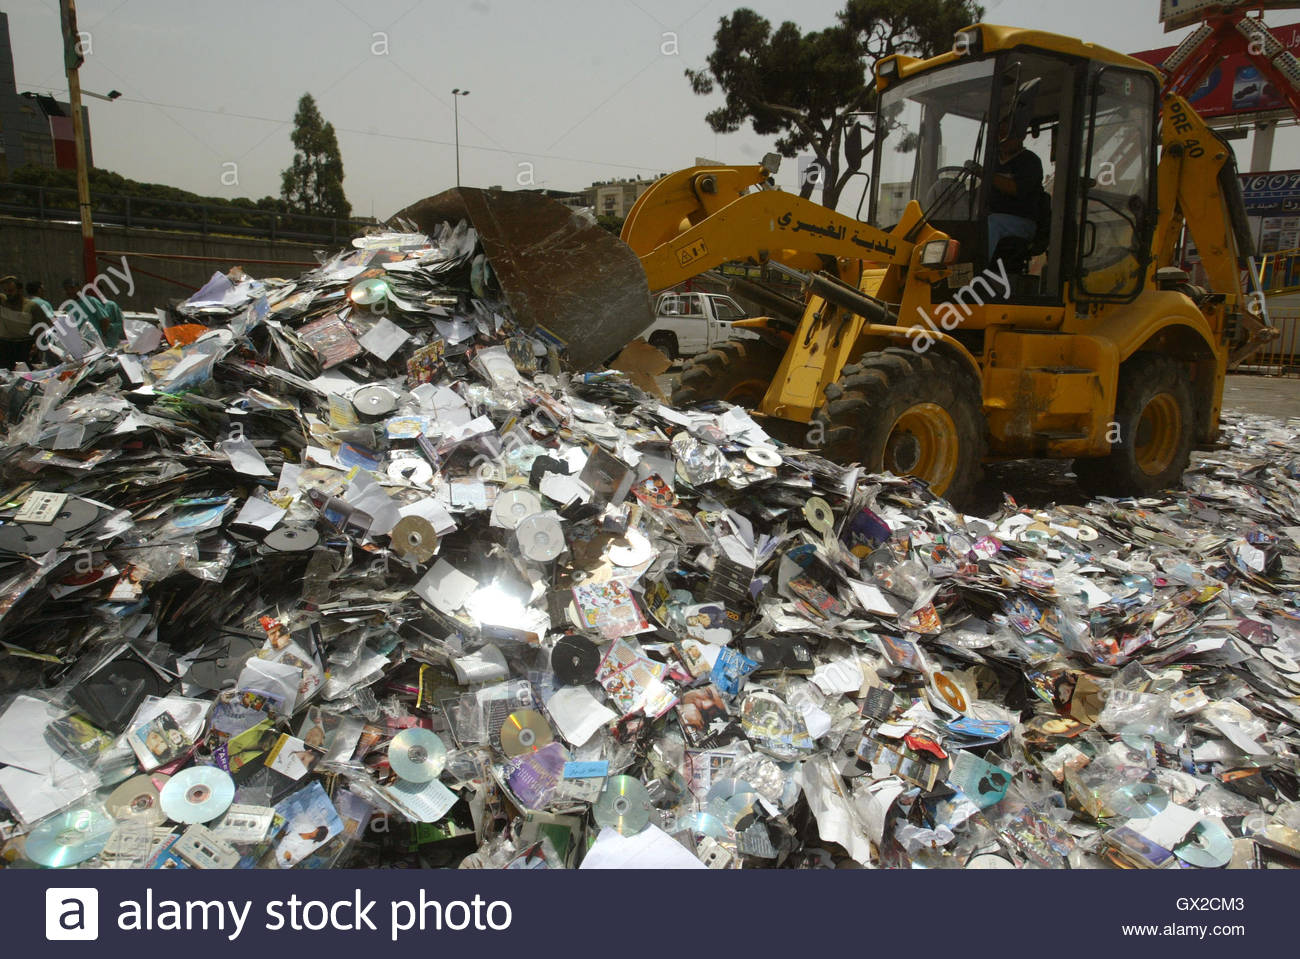 a-bulldozer-destroys-a-pile-of-pirated-cds-and-dvds-that-were-confiscated-GX2CM3.jpg